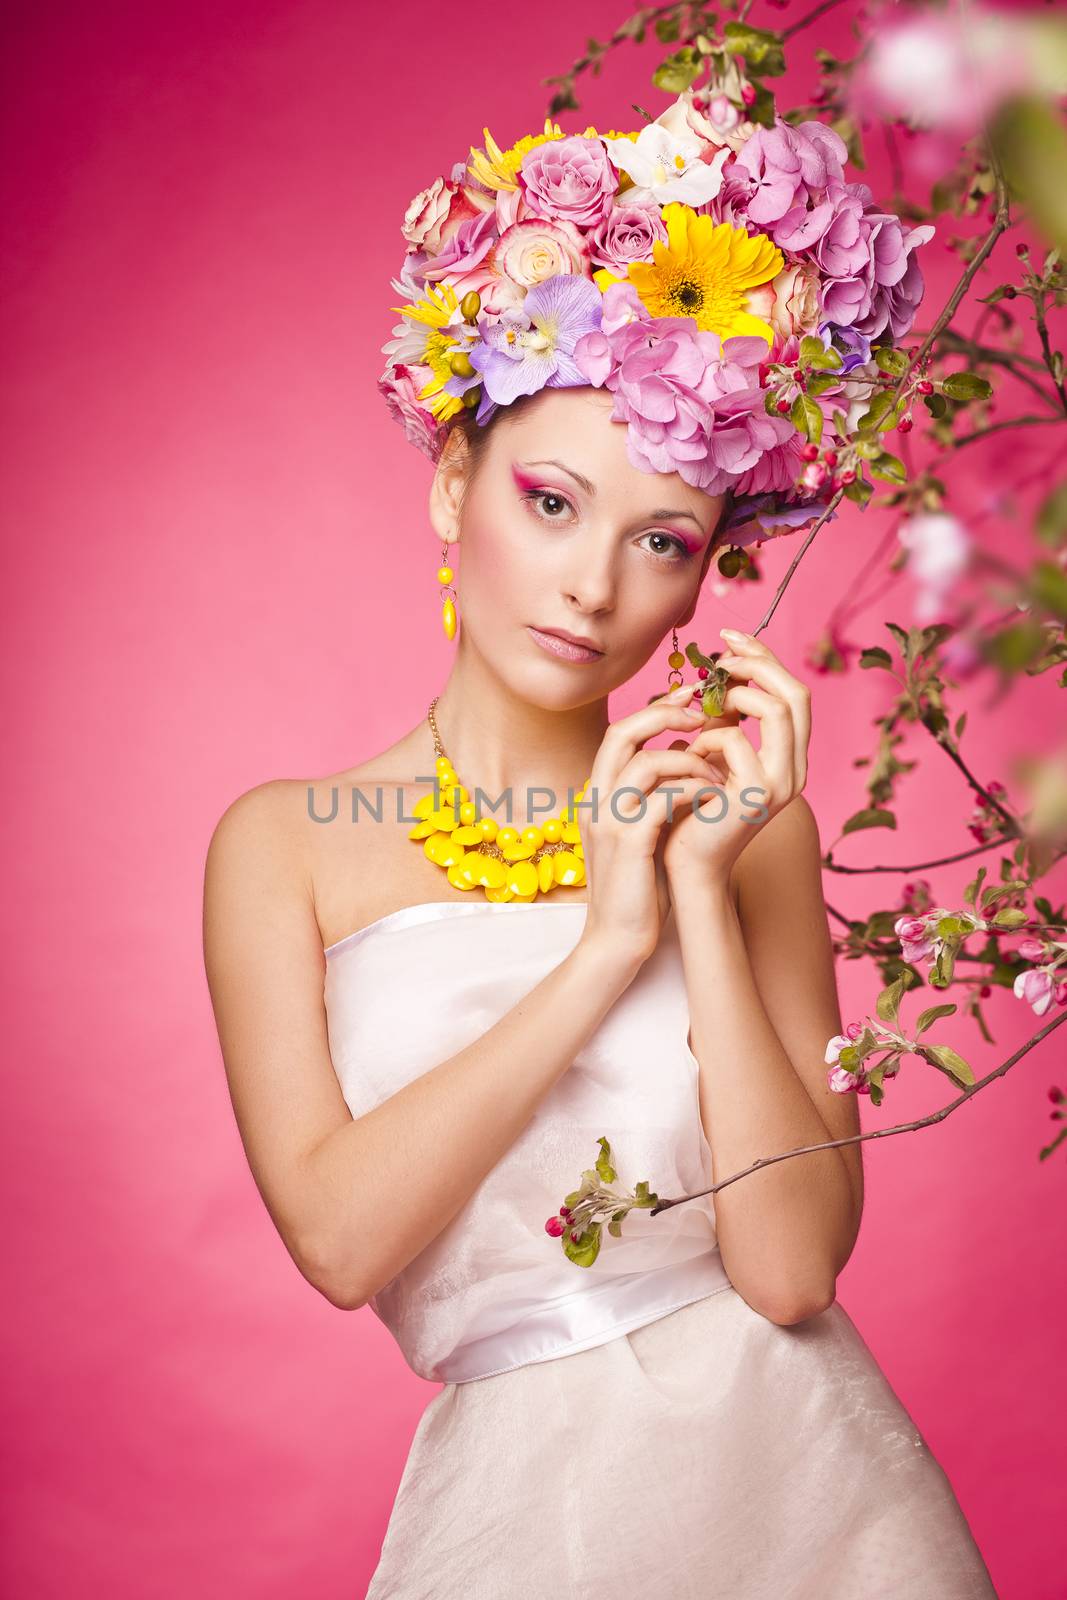 Young lady on a pink background with flower crown